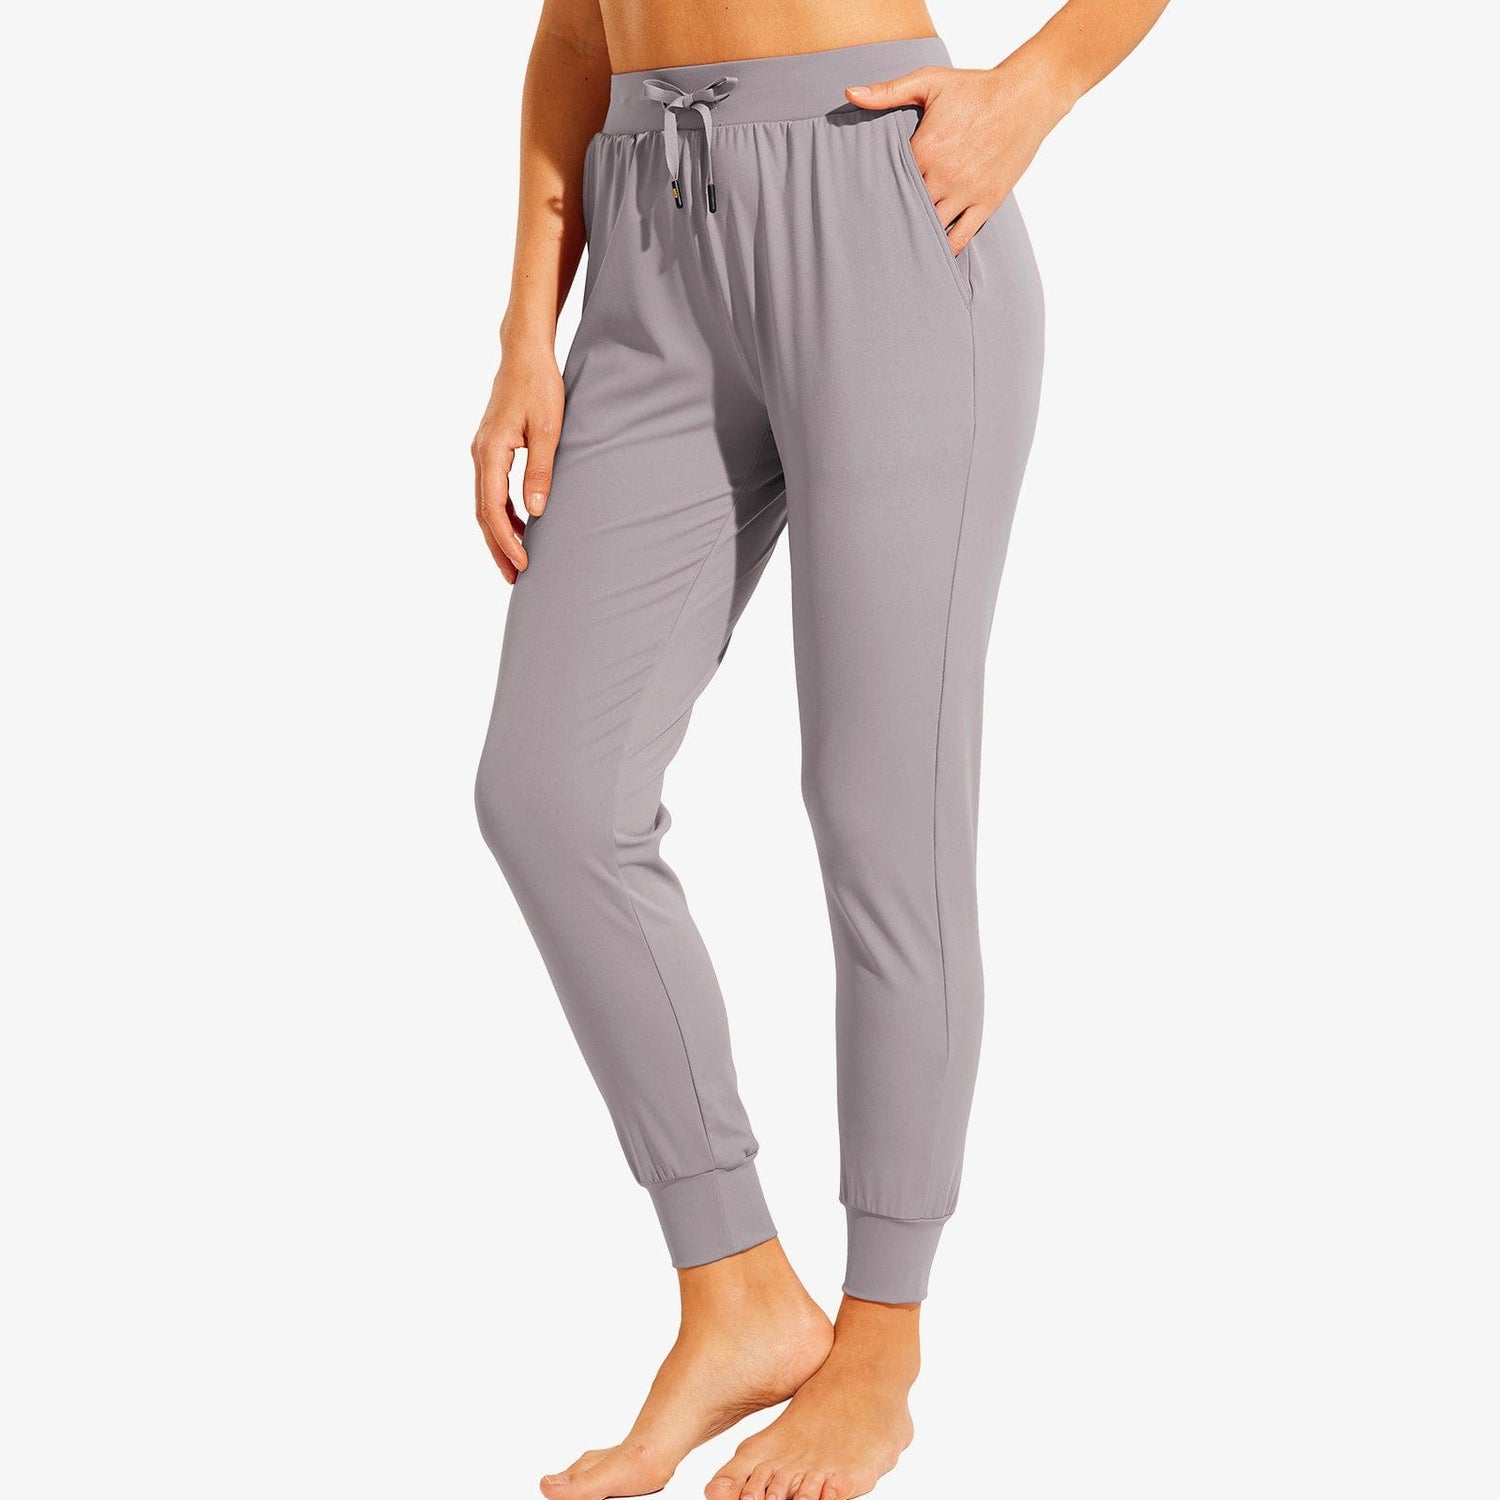 Women Joggers with Pockets Lightweight Athletic Sweatpants Women Active Pants Light Grey / XS MIER